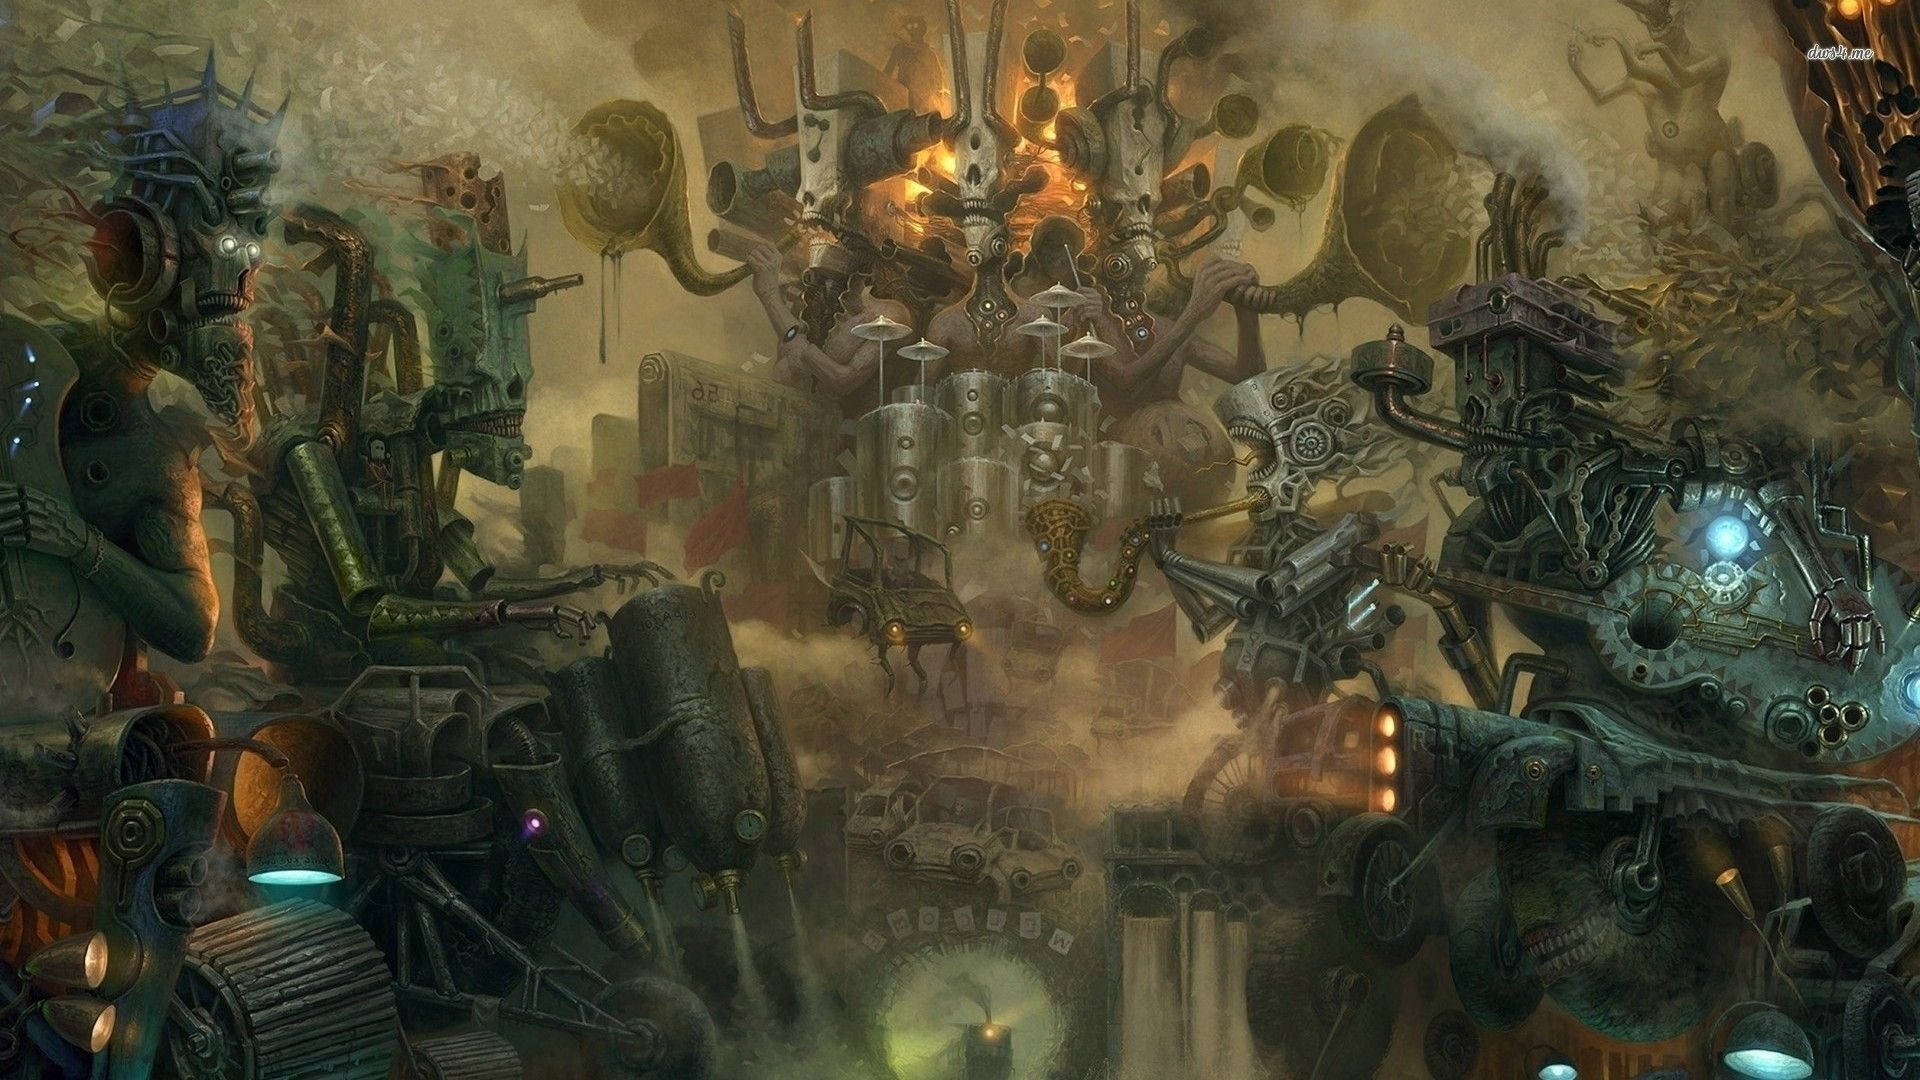 A mechanical marvel of steampunk machinery Wallpaper